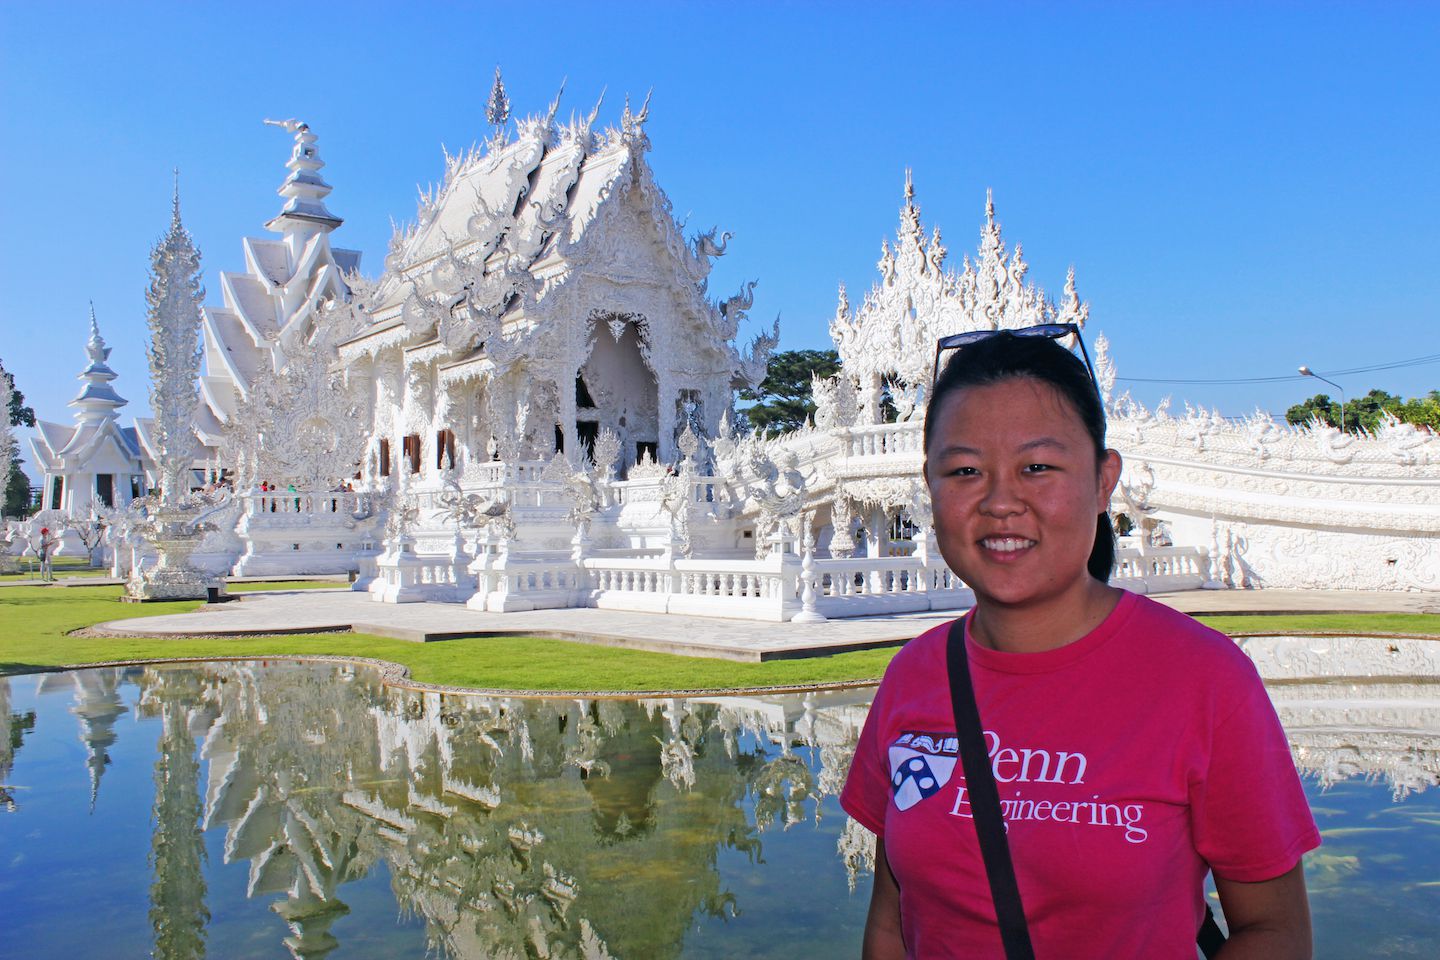 Julie at the White Temple in Chiang Rai